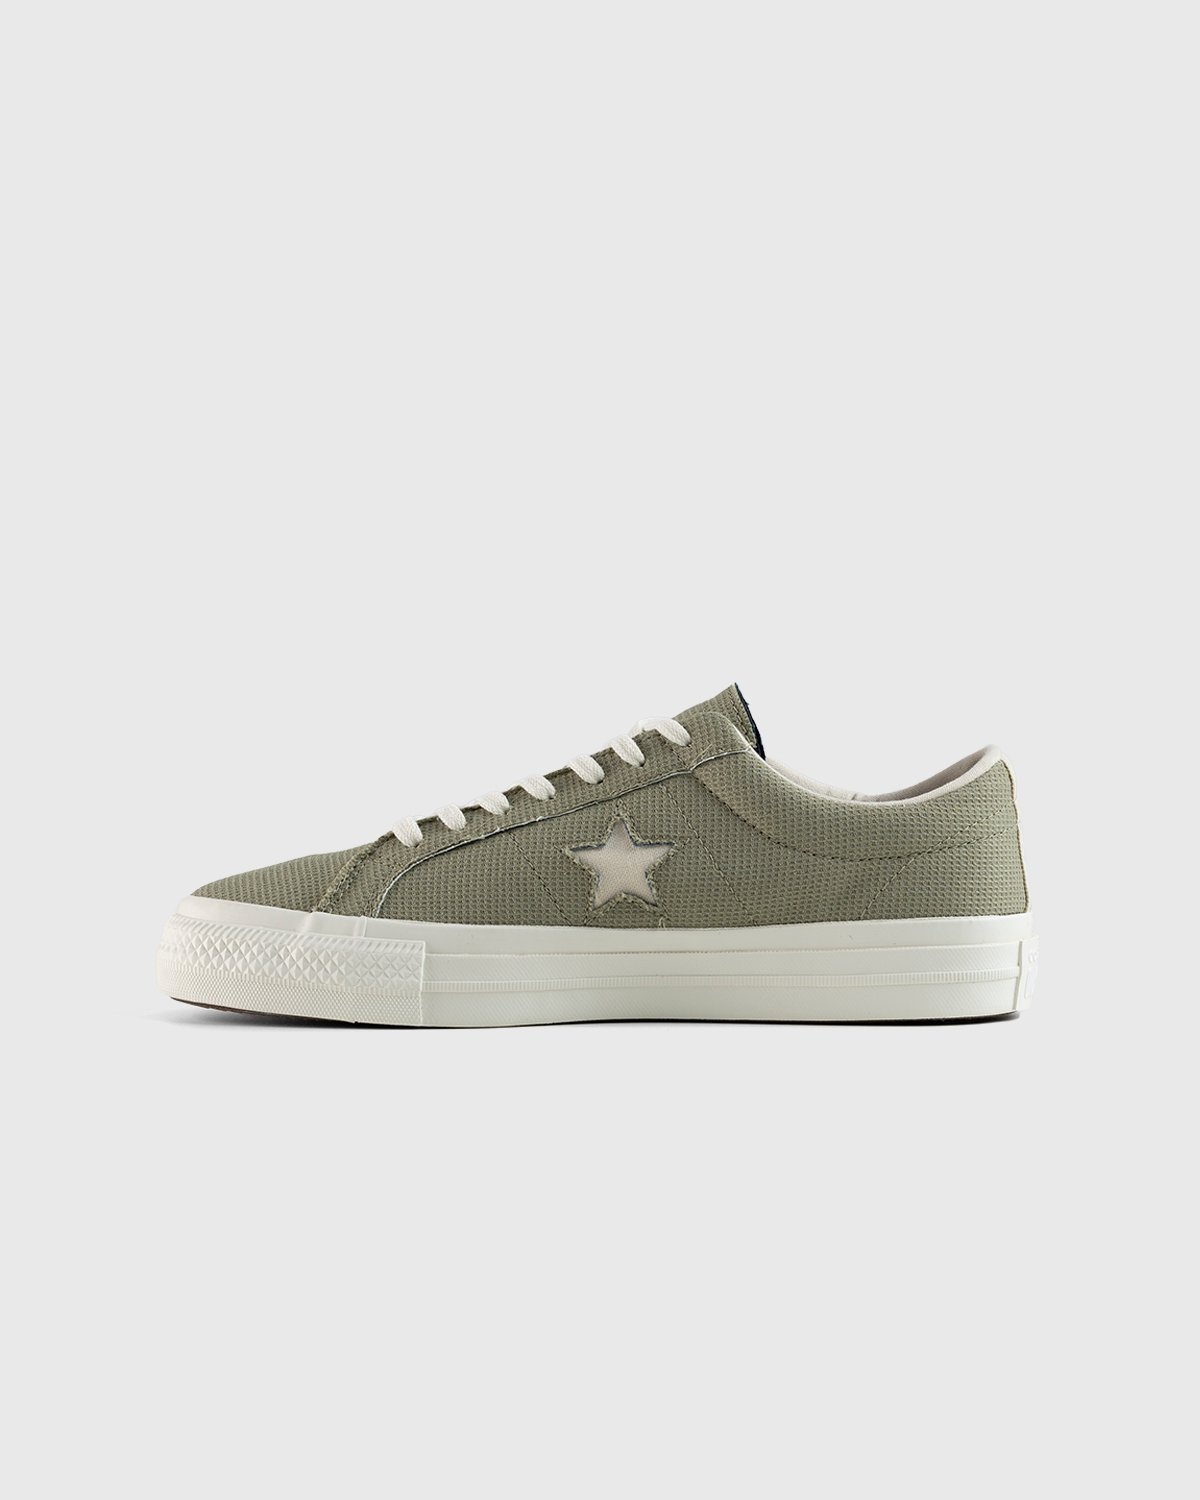 Converse – One Star Ox Indigo/Obsidian/Egret - Sneakers - Green - Image 2